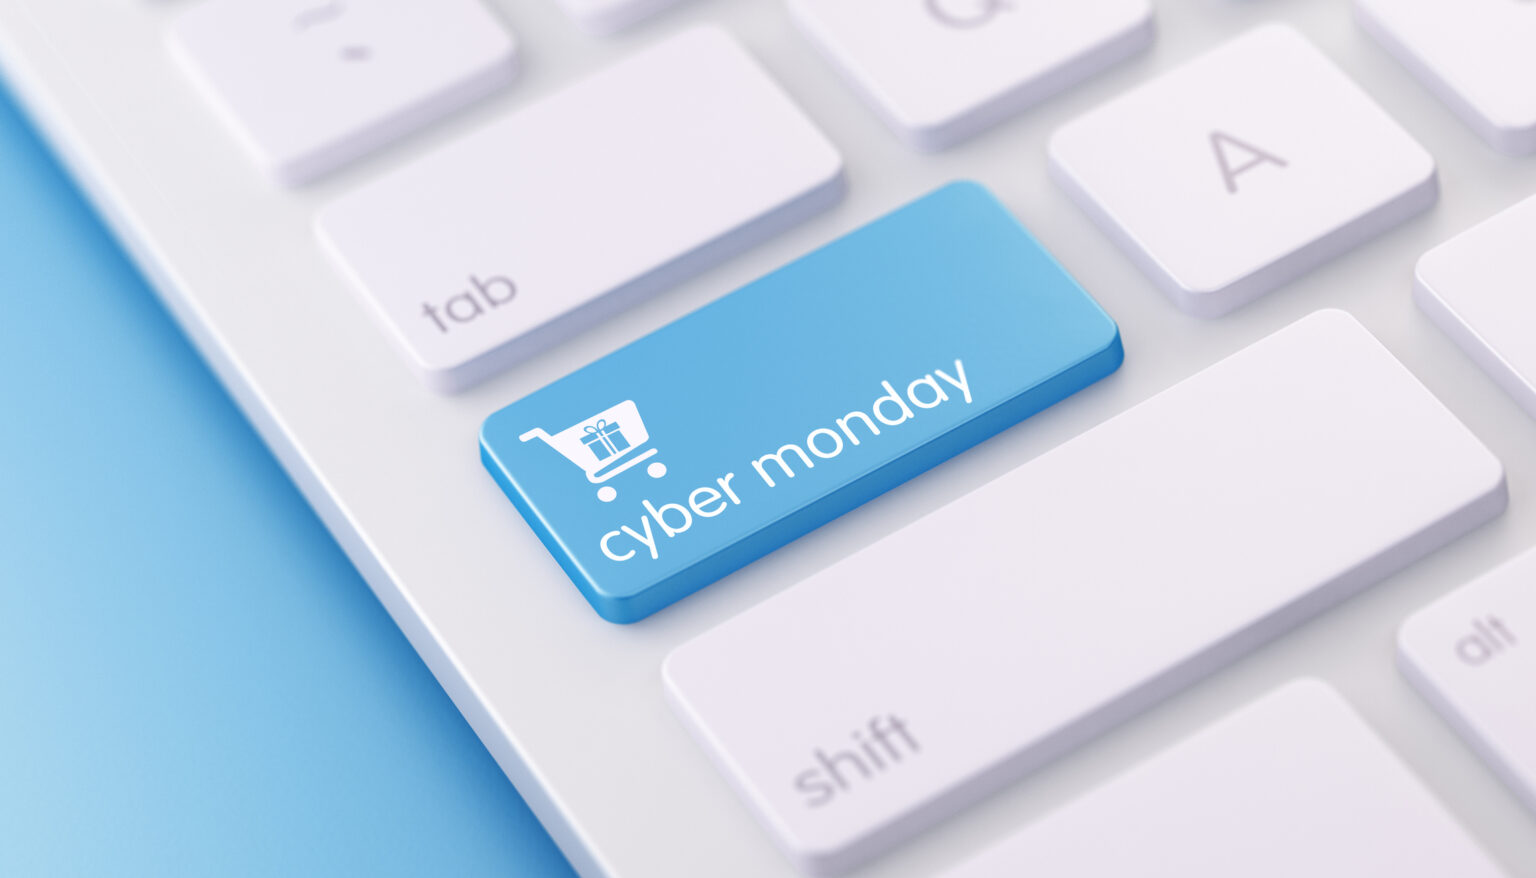 High quality 3d render of a modern keyboard with blue cyber monday button on a blue background and copy space. Blue cyber monday keyboard button has a text  and an icon on it. Cyber monday keyboard button is  in focus, Horizontal composition with copy space.